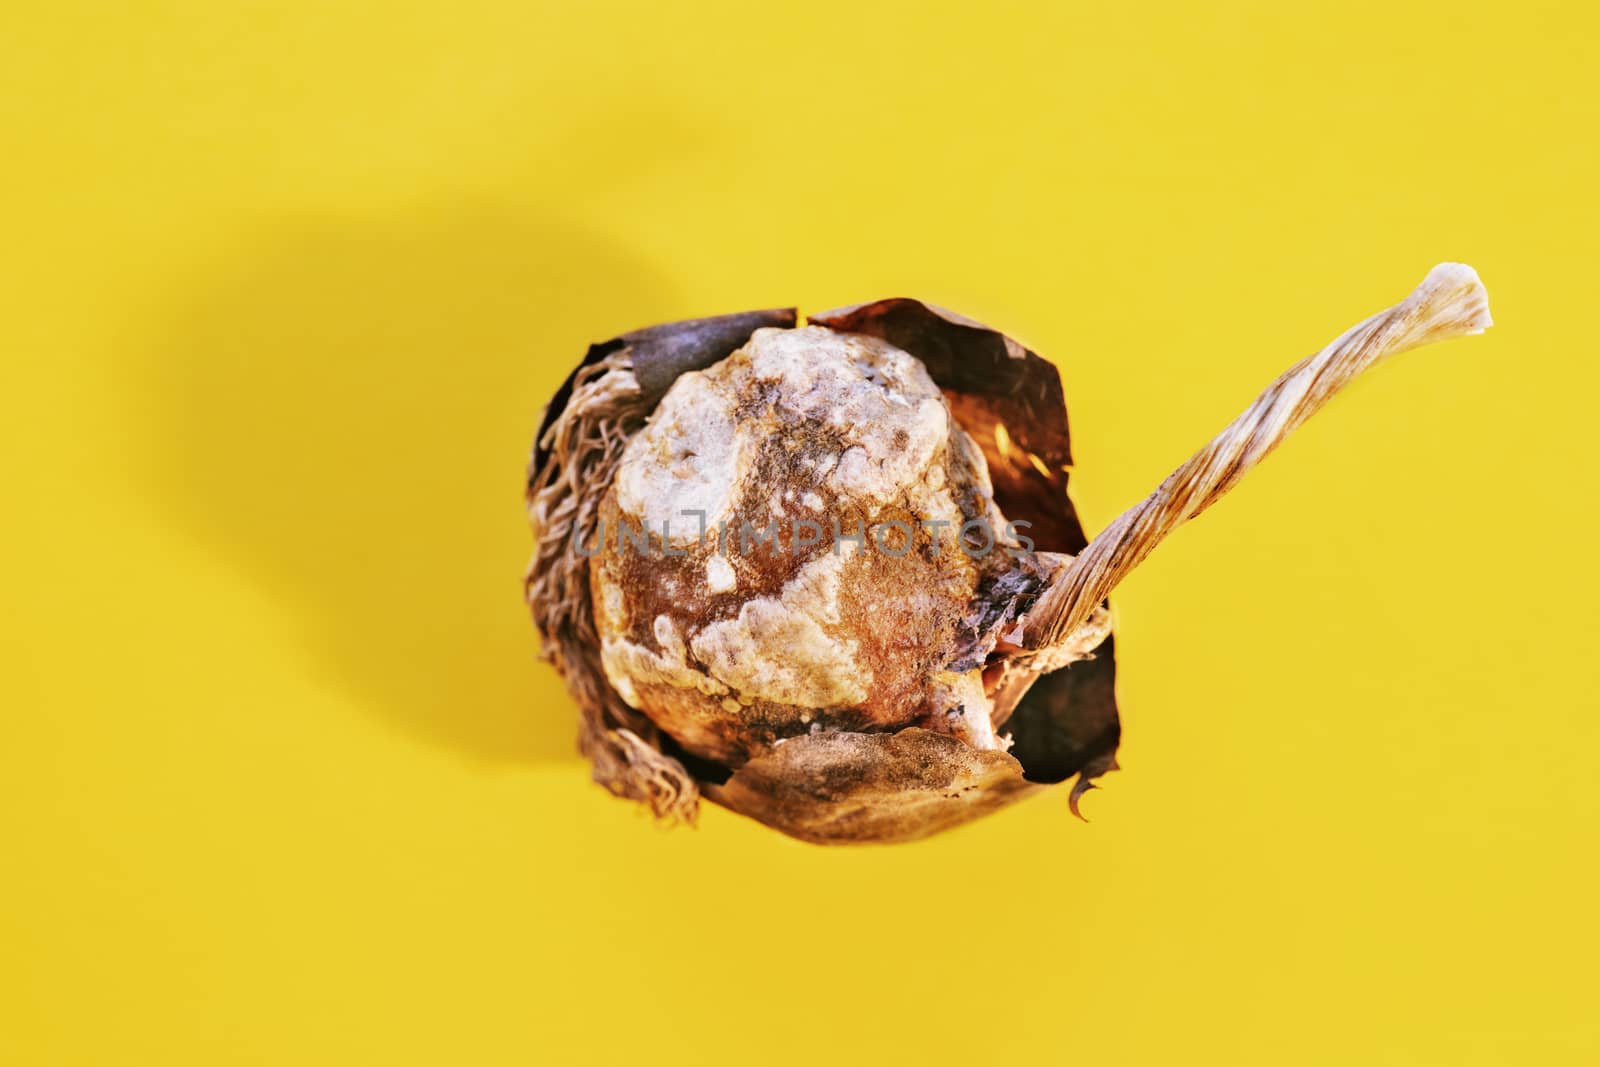 Bulb of tulip flower  on colored background , dried brown surface with long stem